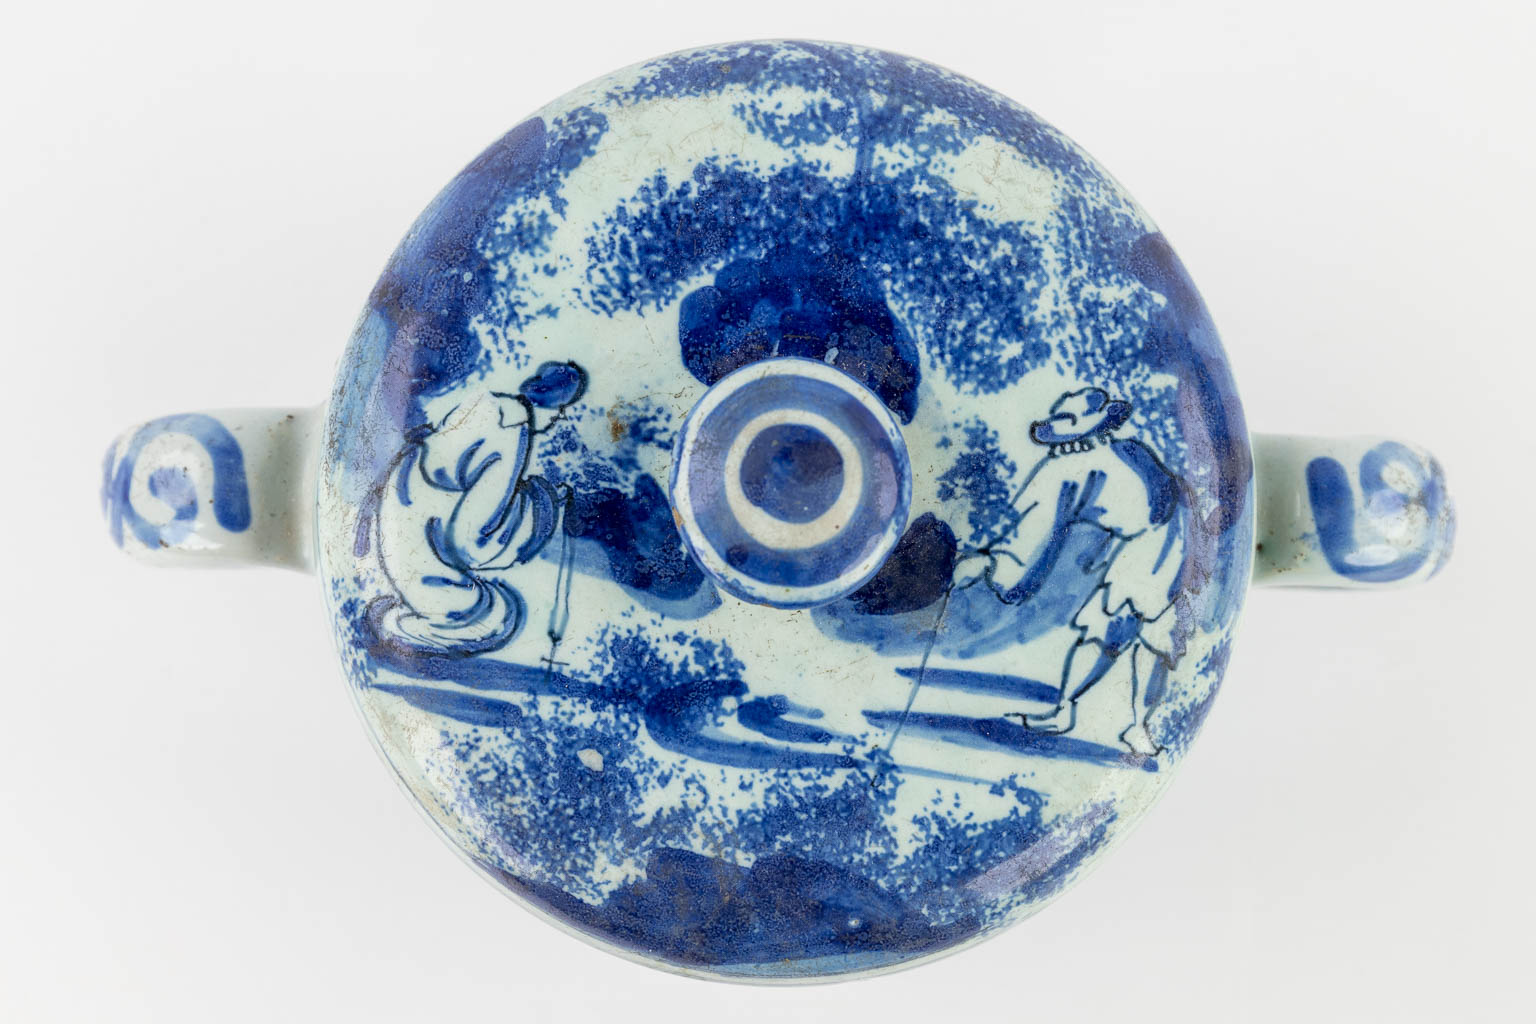 Delft Faience, a jar with two handles and a lid, decor of figurines in a landscape. 18th C. (D:12,5 x W:19 x H:11,5 cm)